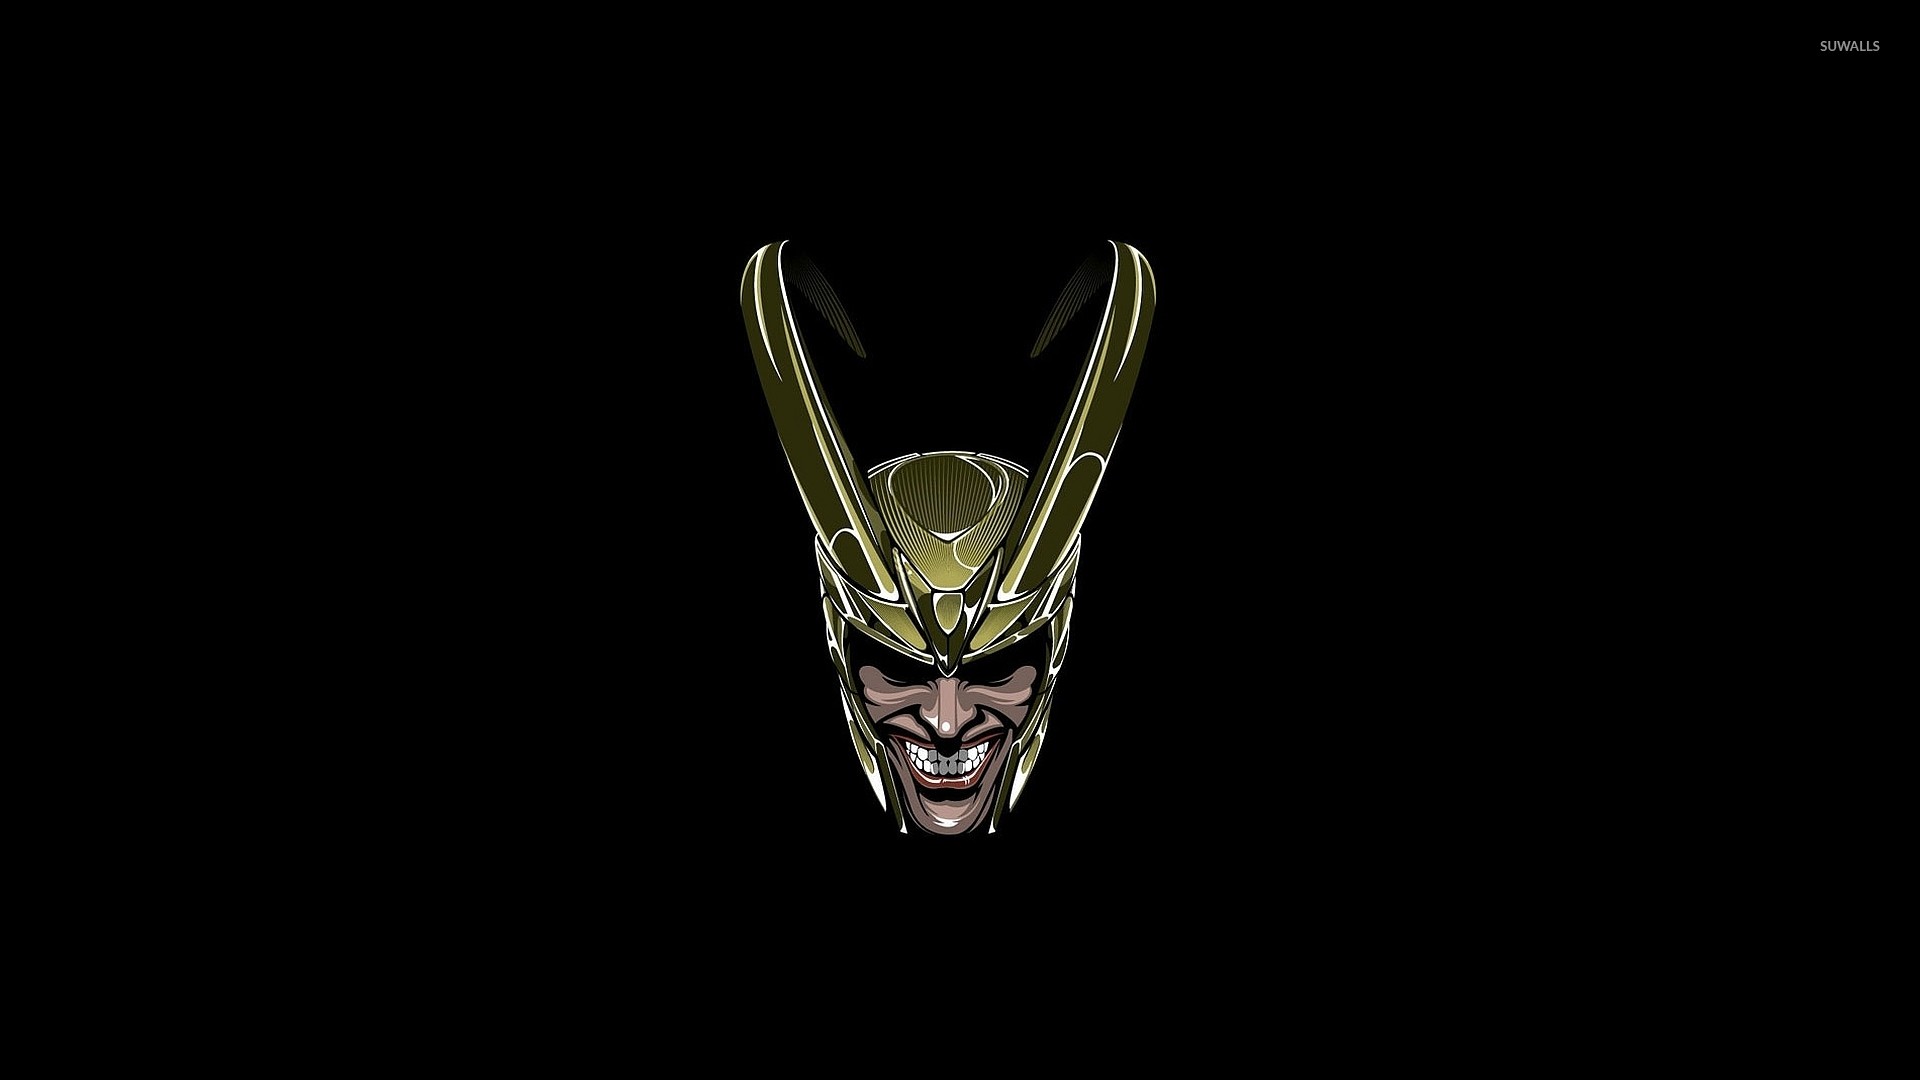 1920x1080 Loki smiling emerging from the darkness wallpaper